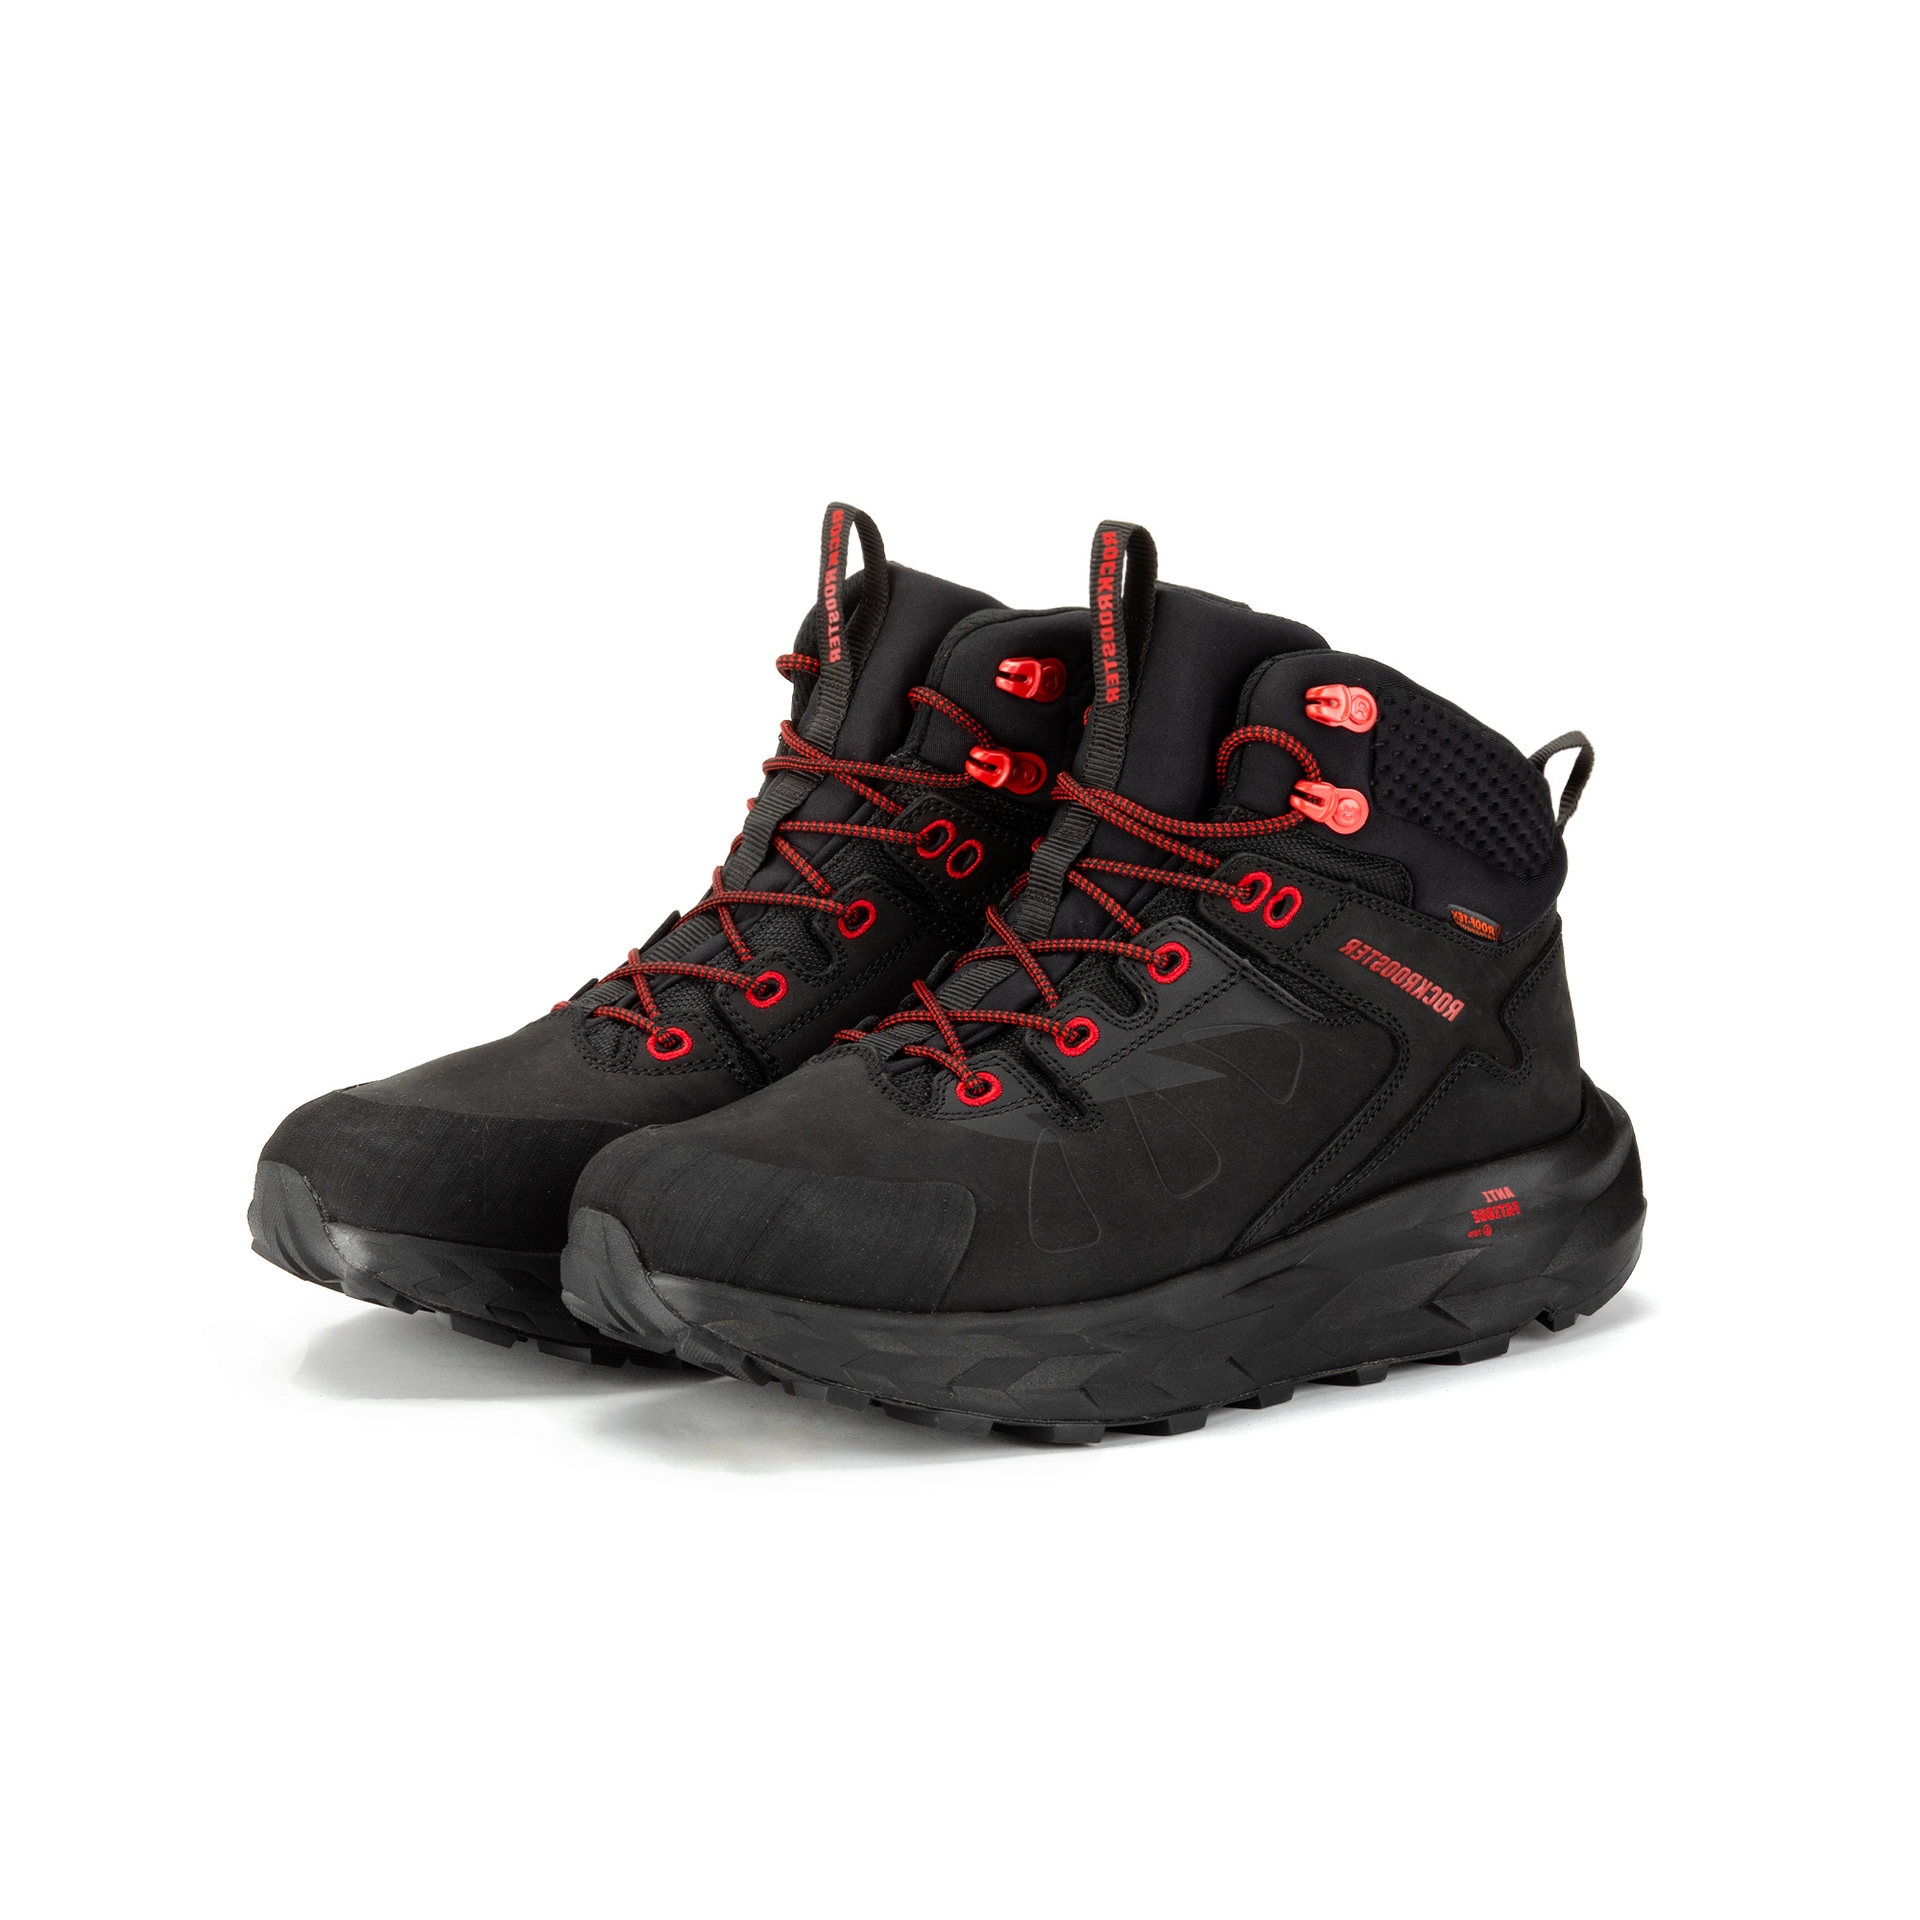 ROCKROOSTER Farmington Black 6 Inch Waterproof Hiking Boots with - Mercantile Mountain